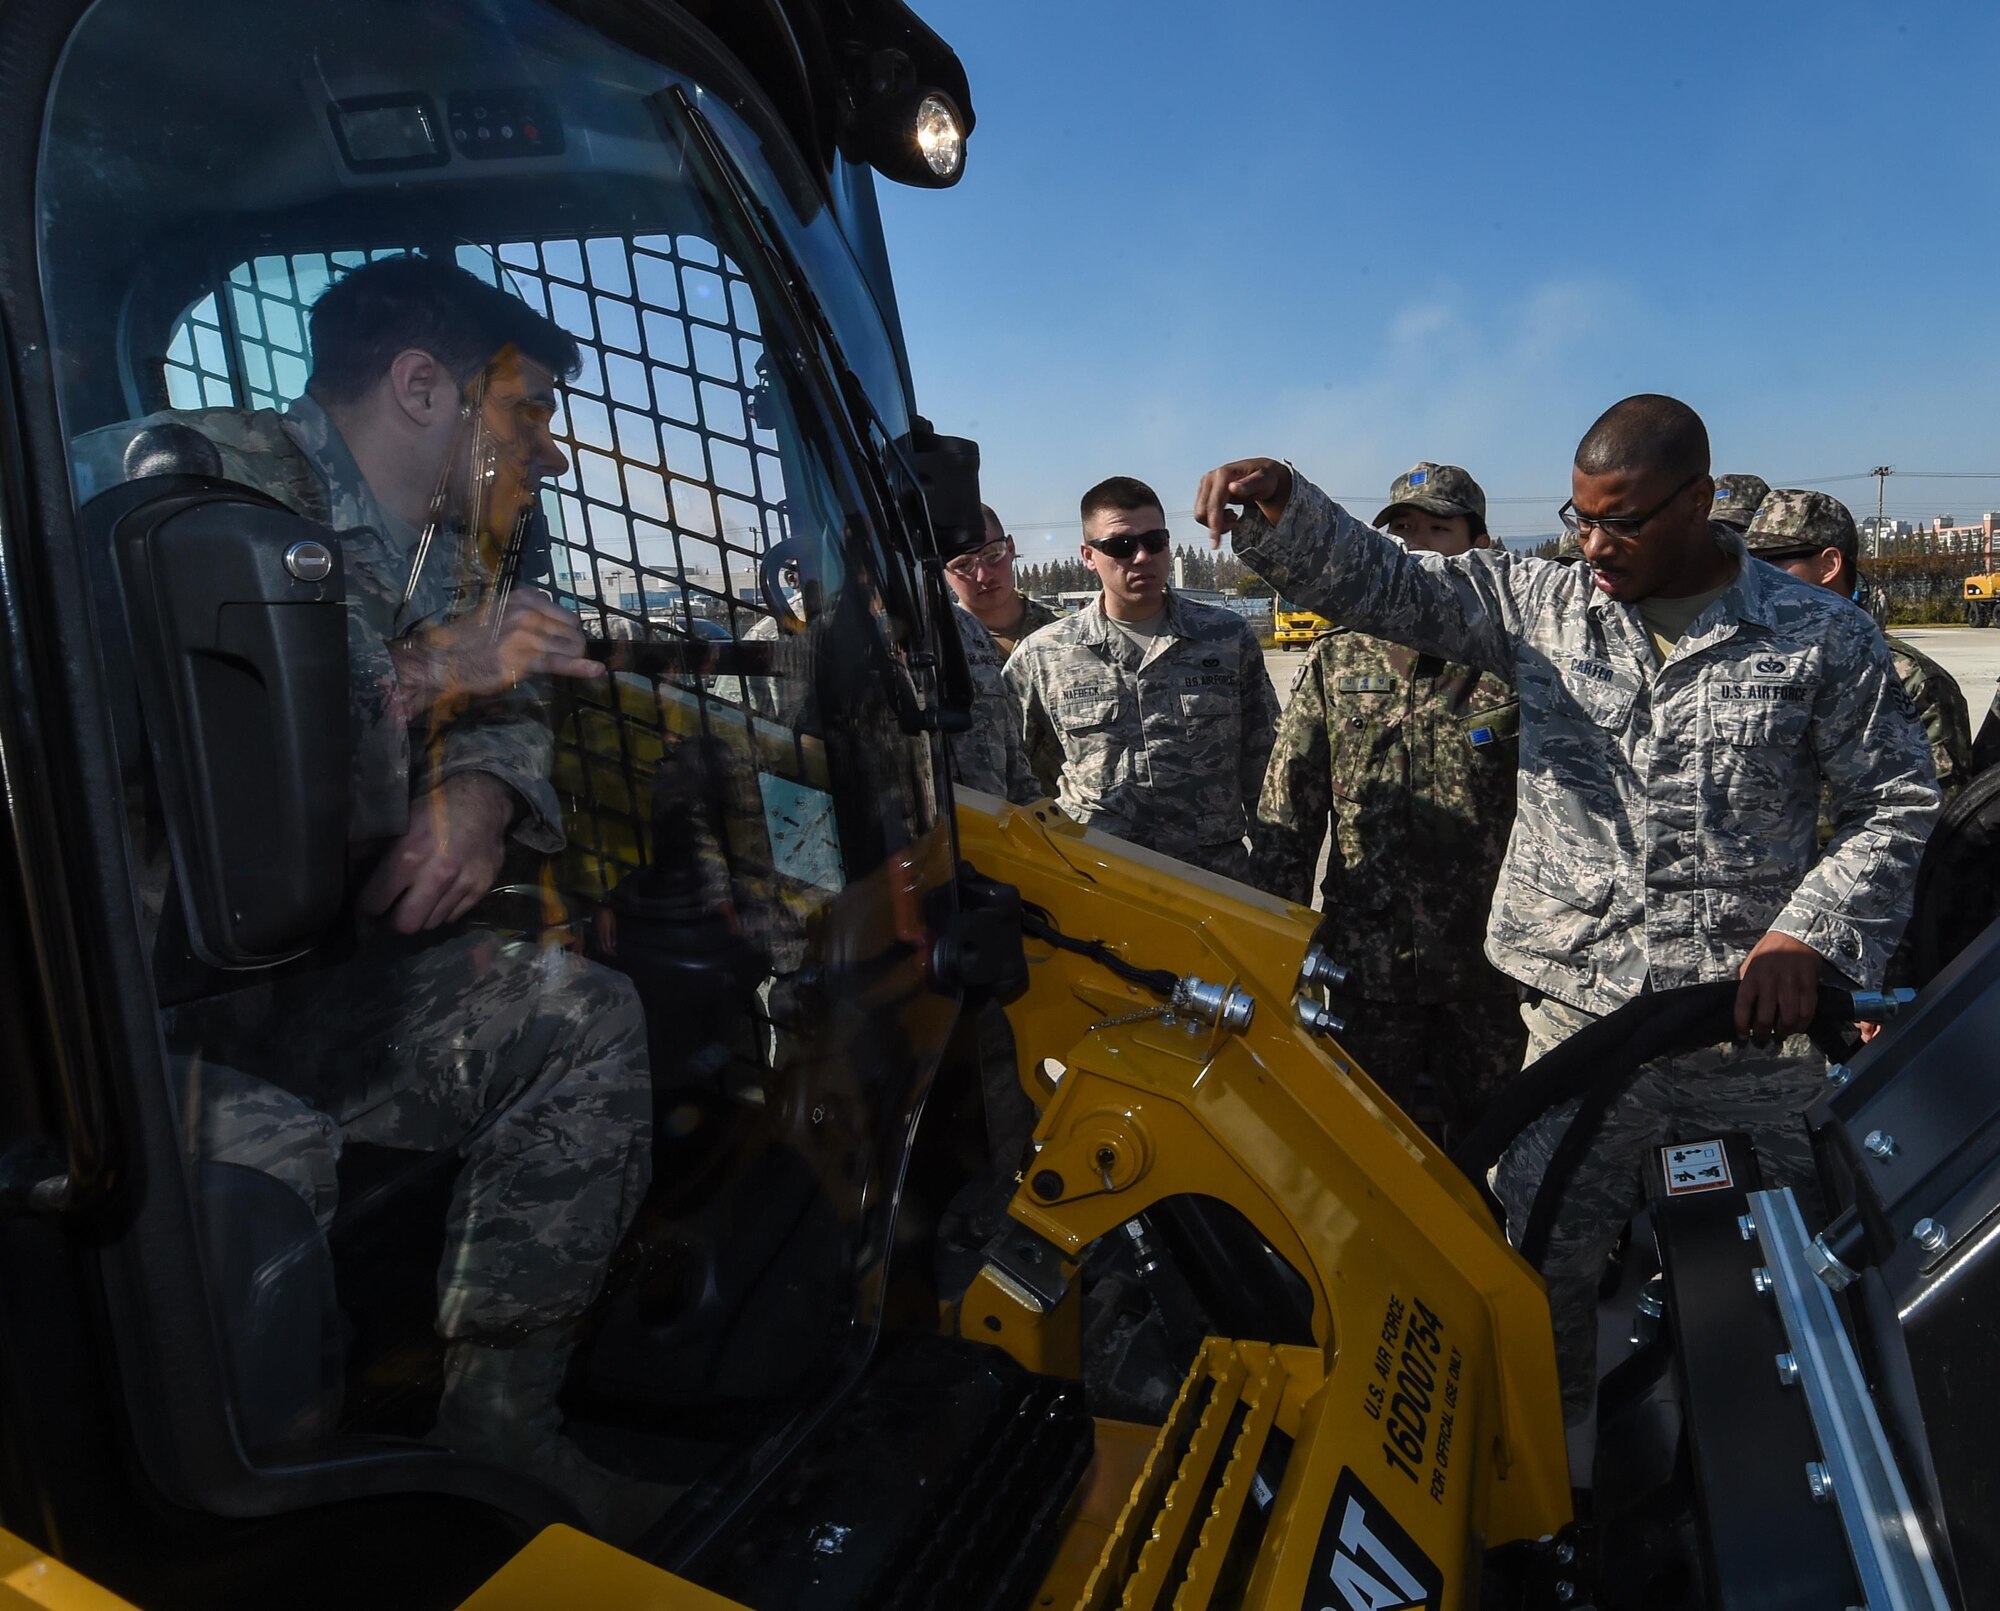 U.S. Air Force Staff Sgt. Marvin Carter, Air Force Civil Engineer Center contingency trainer, instructs U.S. and Republic of Korea Airmen during a bilateral training exercise at Gwangju Air Base, R.O.K., Nov. 6, 2017. Approximately forty U.S. Airmen from the 773d Civil Engineer Squadron at Joint Base Elmendorf-Richardson, Alaska, and 40 Republic of Korea Airmen from Gwangju trained together for a week to learn a new runway repair process for wartime contingencies. The bilateral training exercise enhanced interoperability and built partnership capacity in the Indo-Asia Pacific region. (U.S. Air Force photo by Senior Airman Curt Beach)